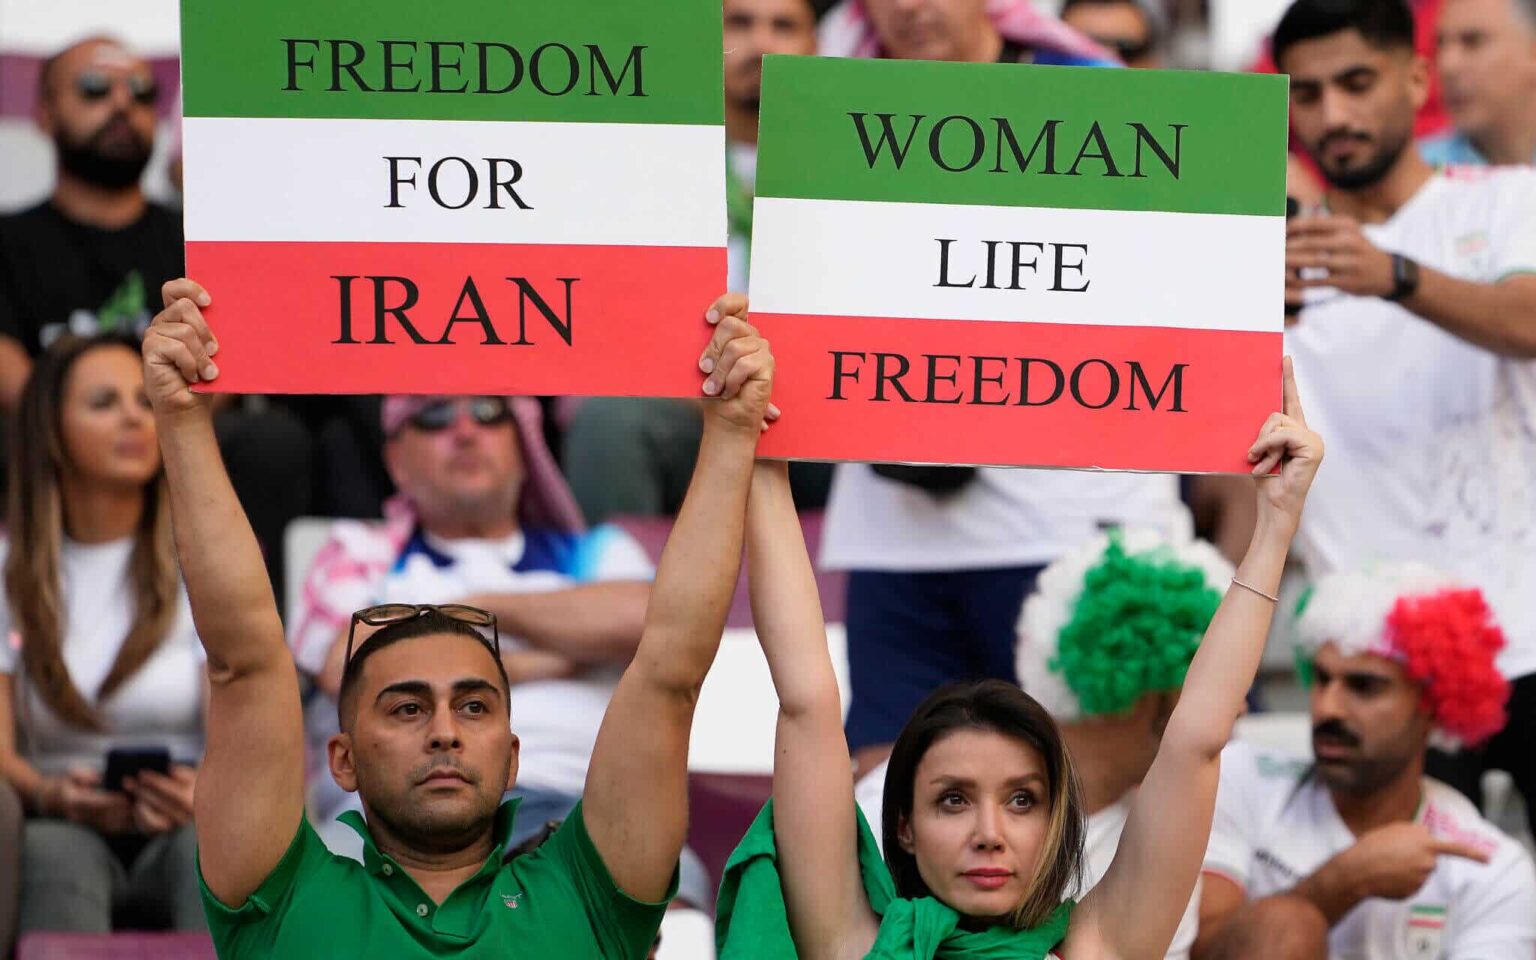 Women barred from entering a football stadium in Iran: Reports